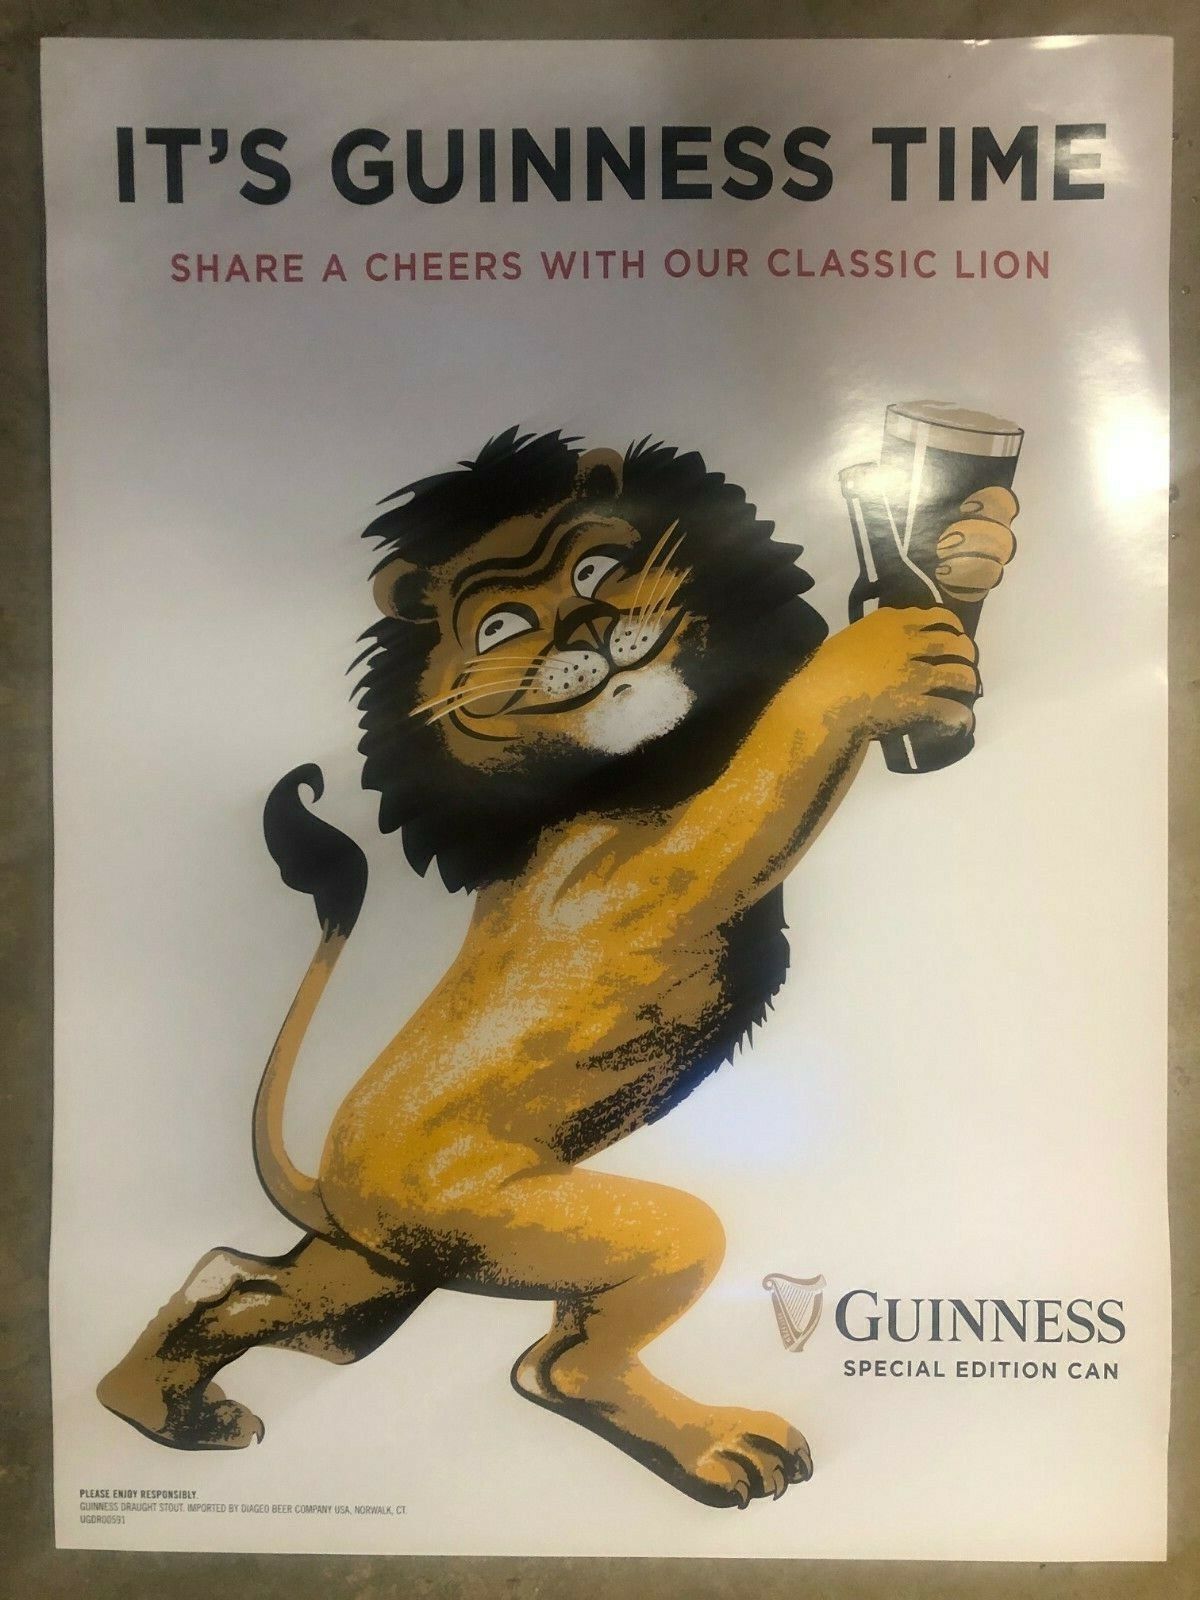 *NEW* Guinness Beer Poster - Gilroy Lion 